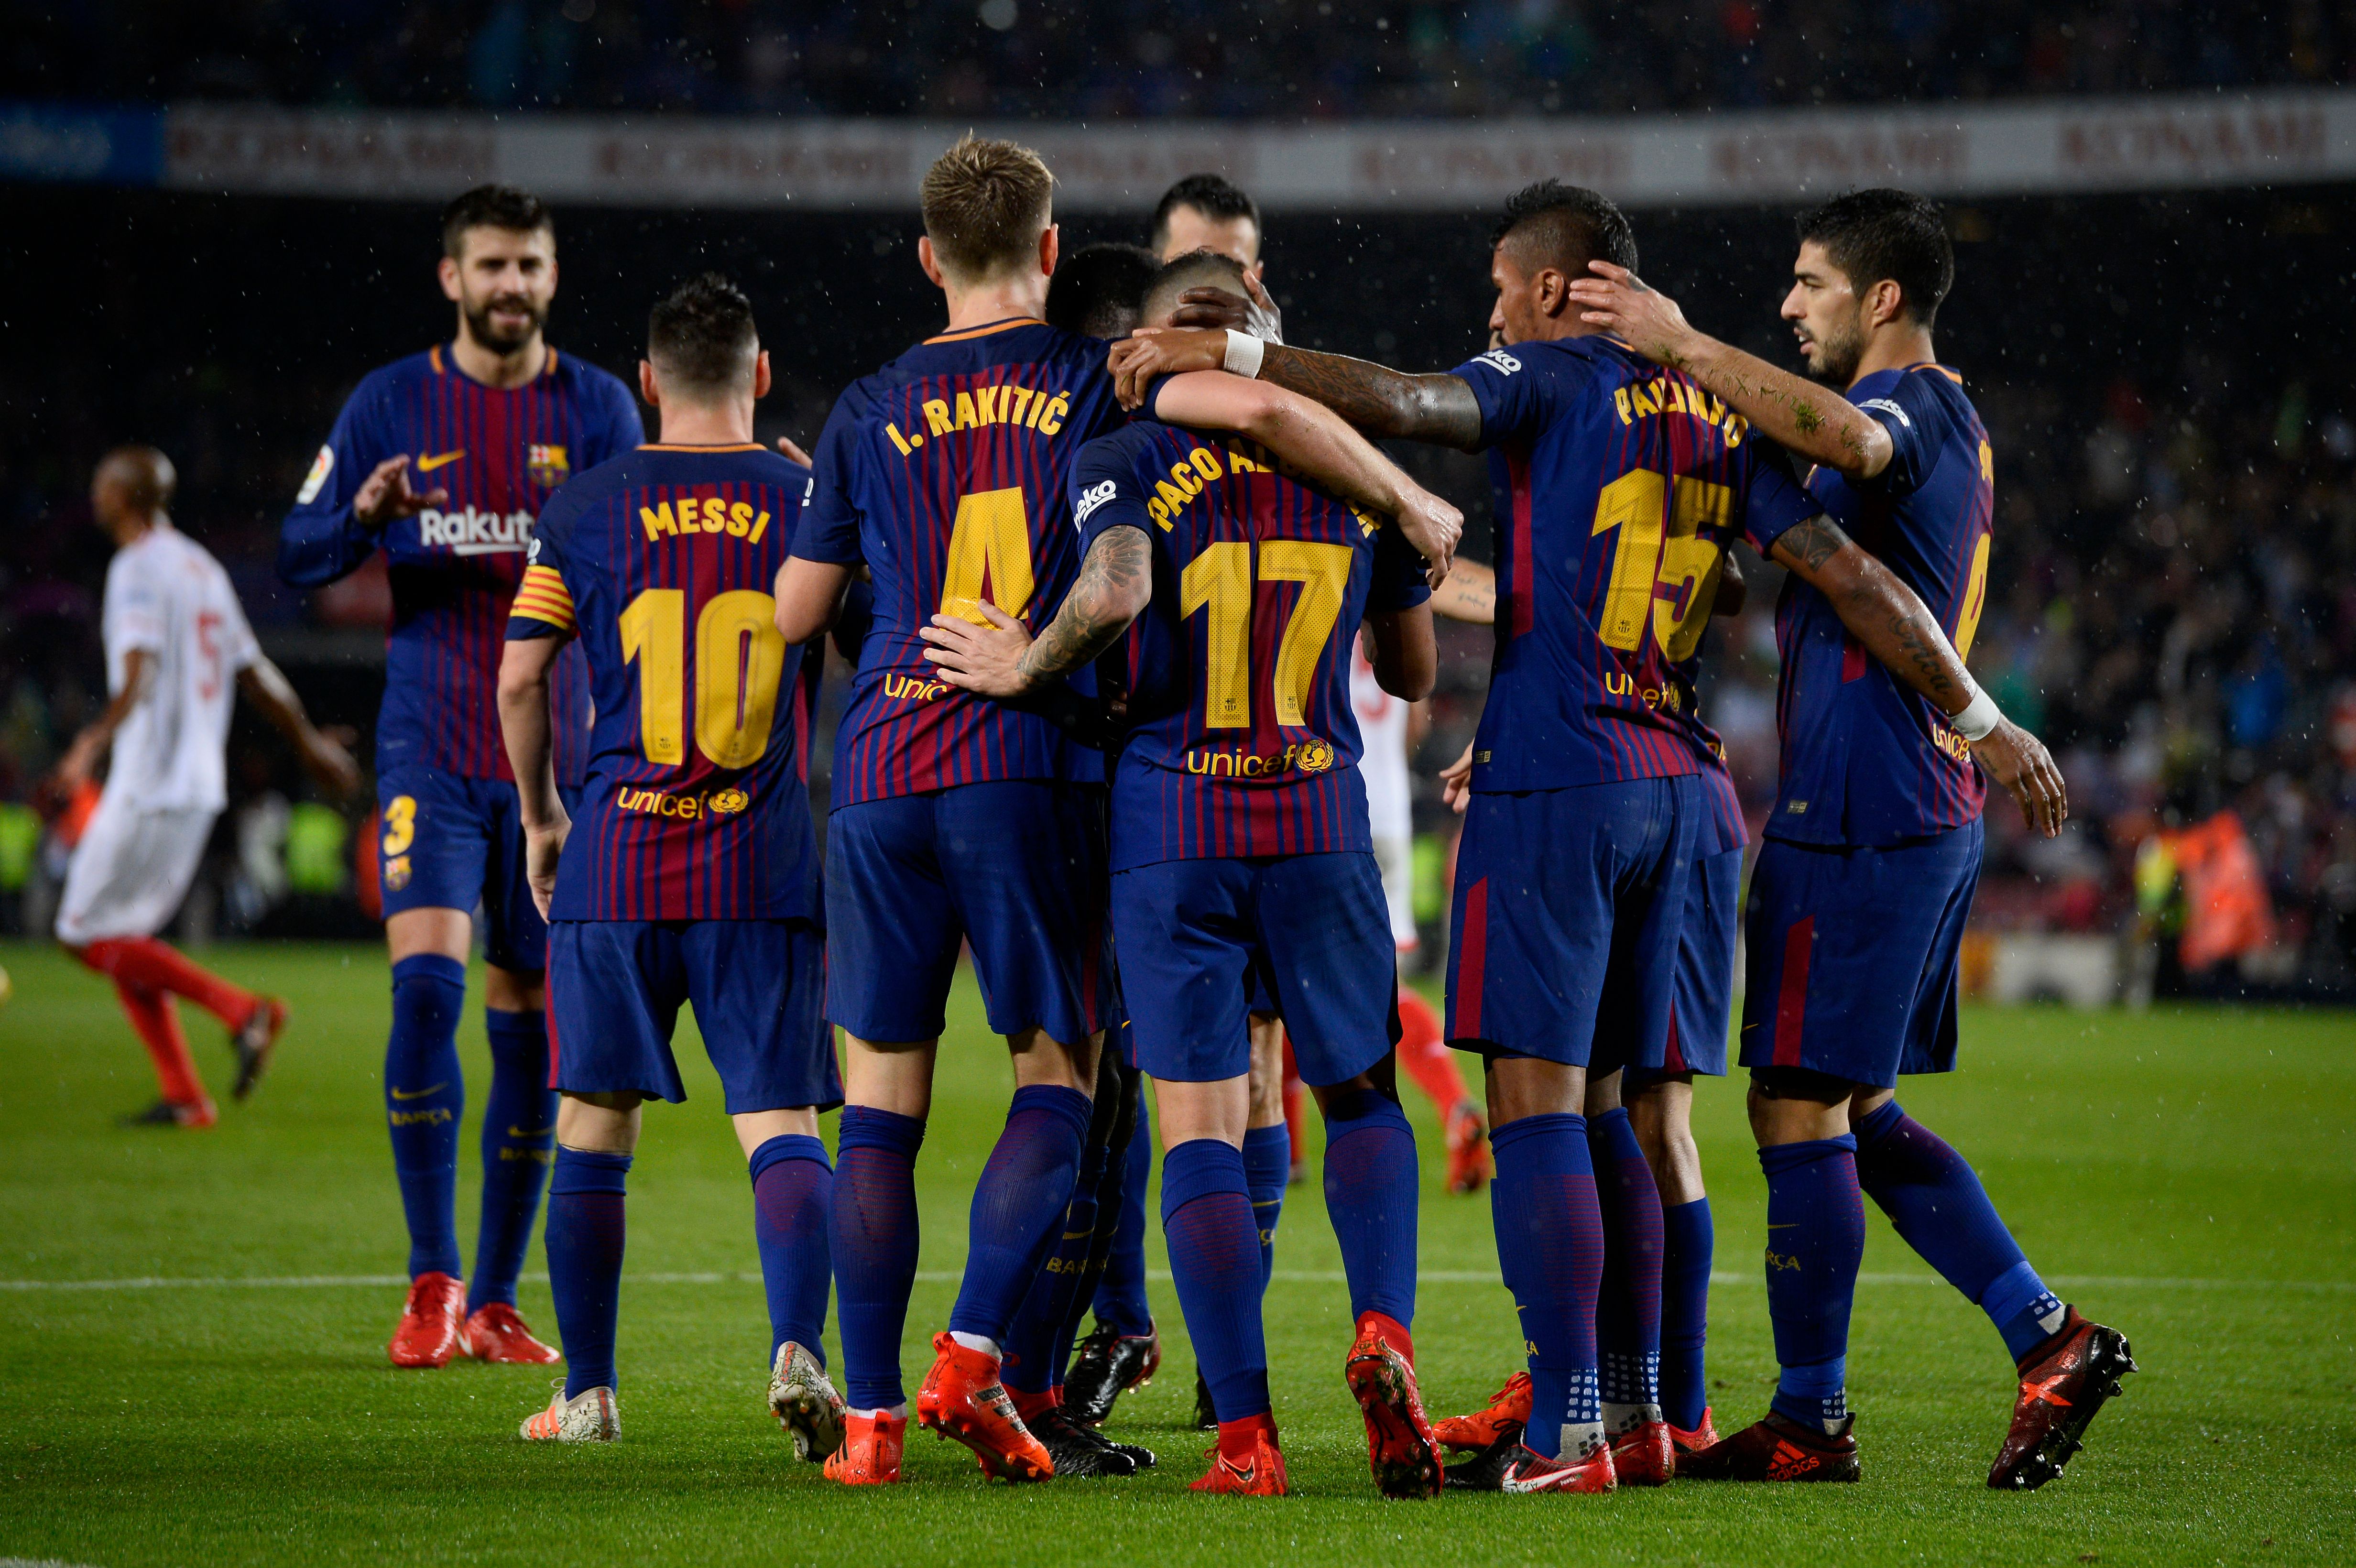 Barcelona's Spanish forward Paco Alcacer (C) celebrates with teammates after scoring a second goal during the Spanish league football match FC Barcelona vs Sevilla FC at the Camp Nou stadium in Barcelona on November 4, 2017. / AFP PHOTO / Josep LAGO        (Photo credit should read JOSEP LAGO/AFP/Getty Images)